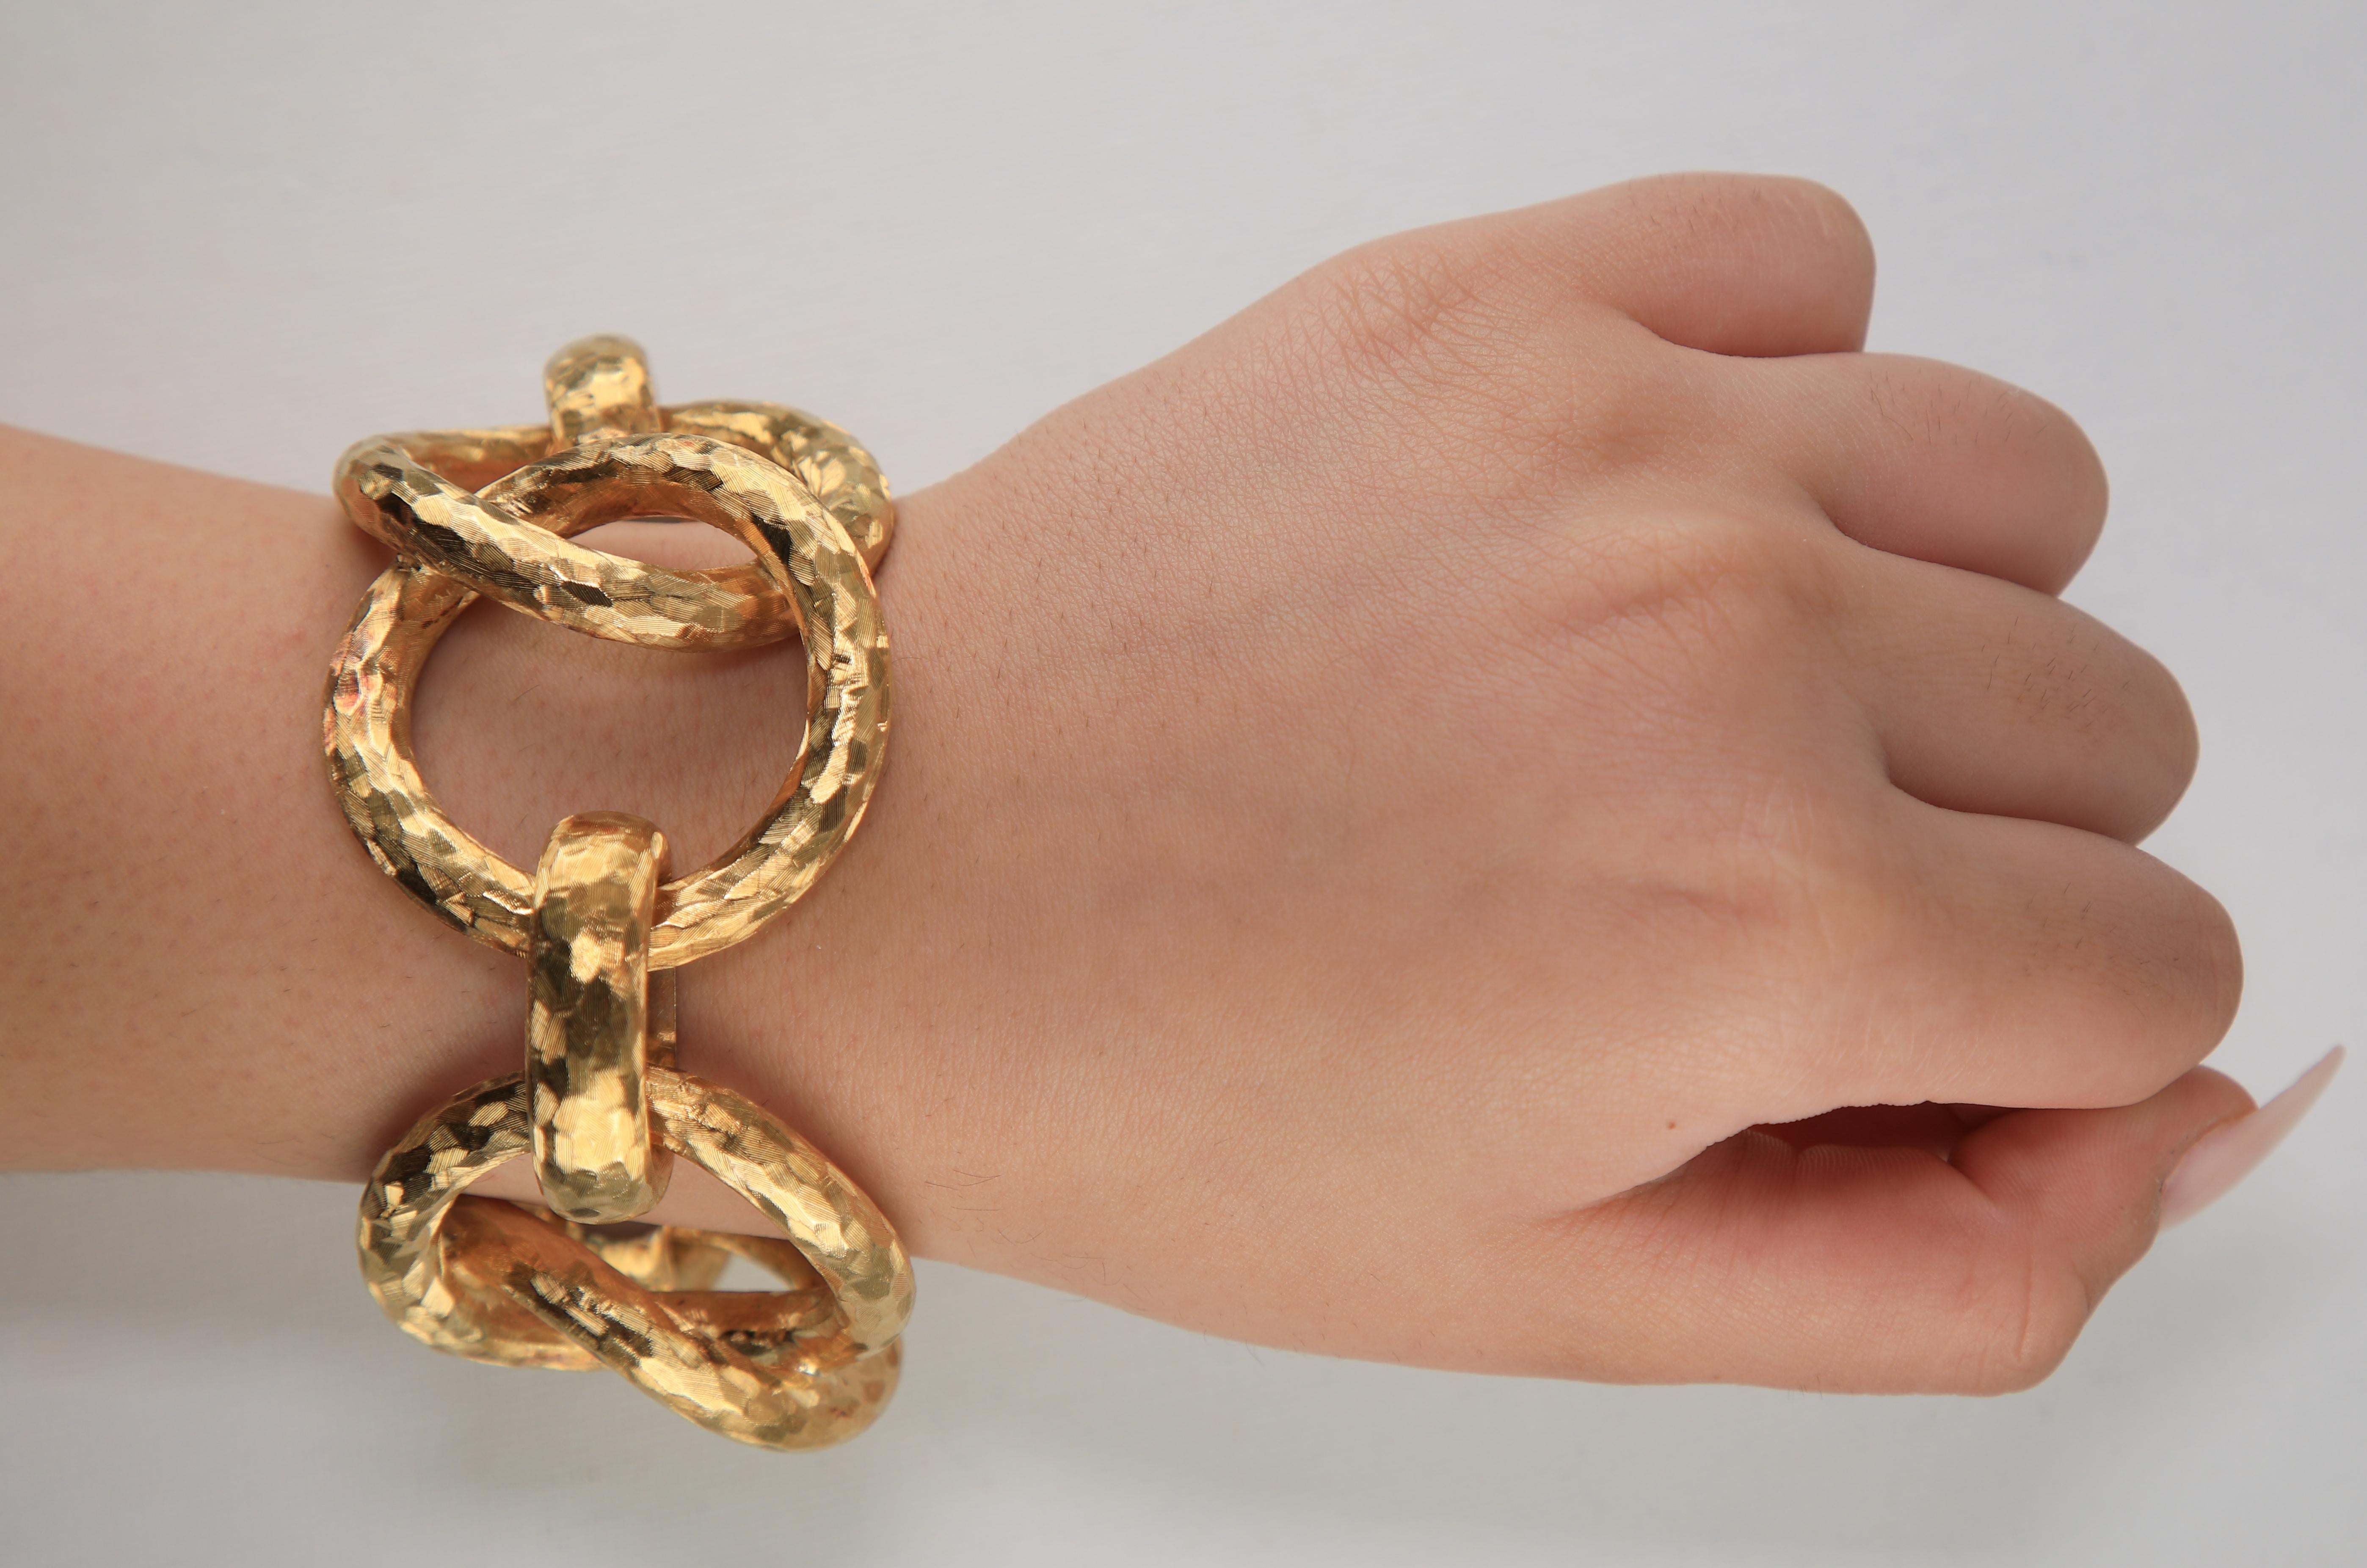 Very Heavy Modernist Polished 18k Gold Jumbo Link Bracelet
An extremely large solid 18k gold jumbo link bracelet, The bracelet feature circular links overlapping and interlocking with each other creating this clunky messy look. Throughout this